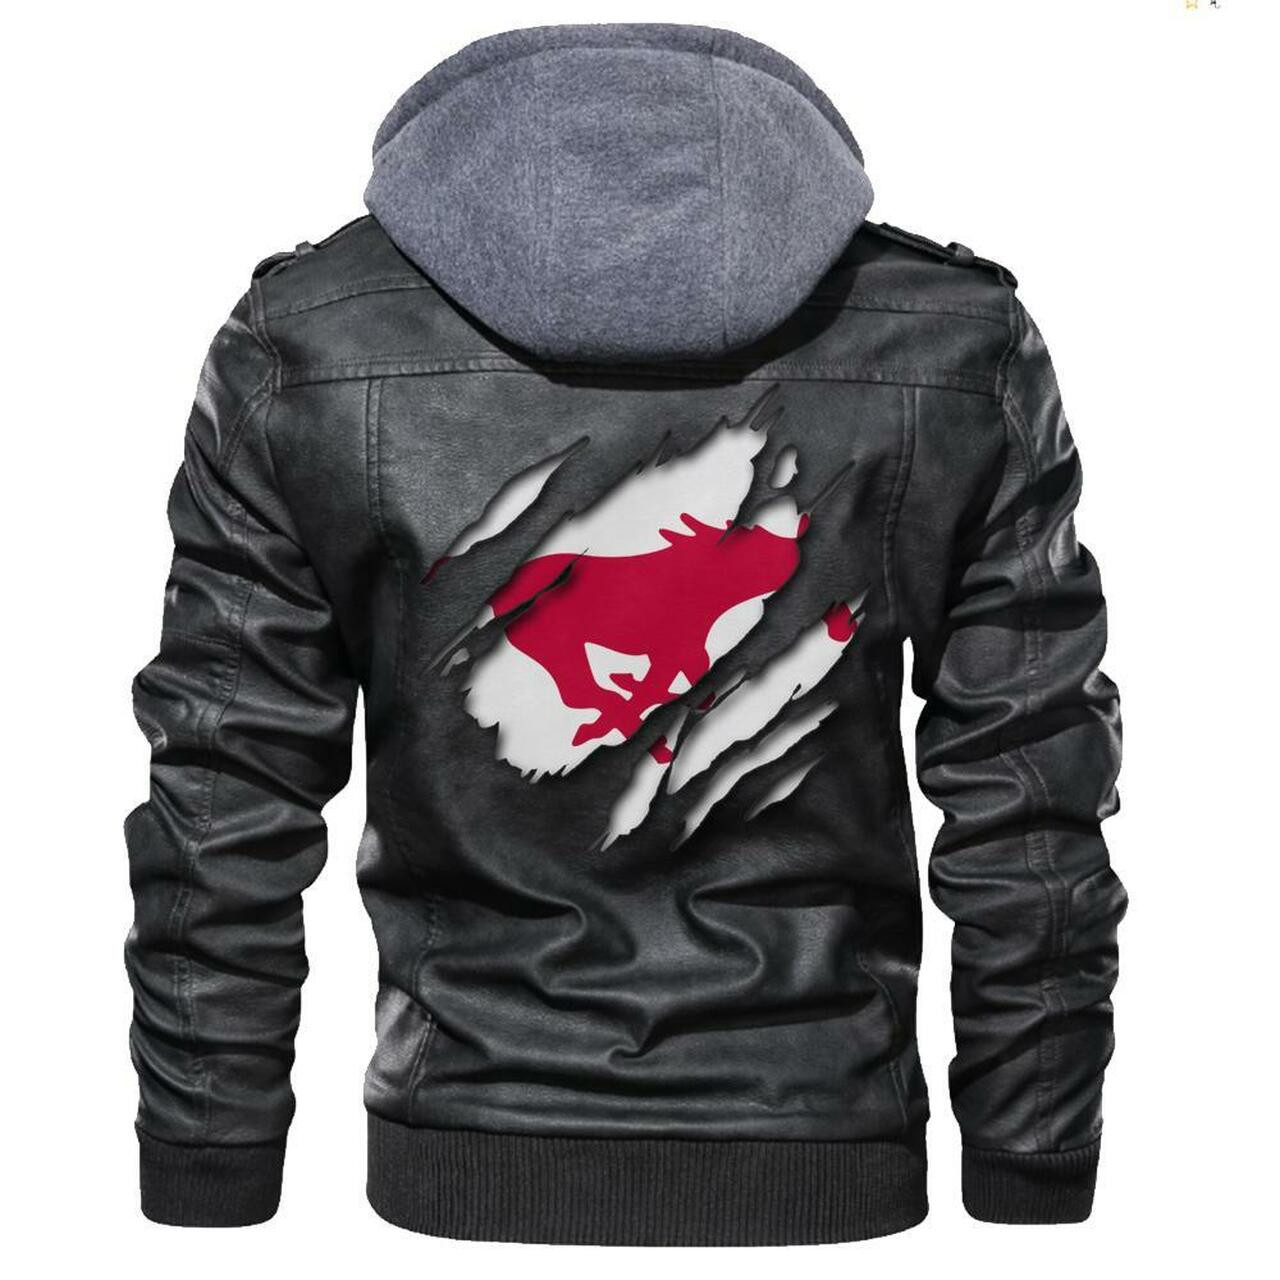 This leather Jacket will look great on you and make you stand out from the crowd 125